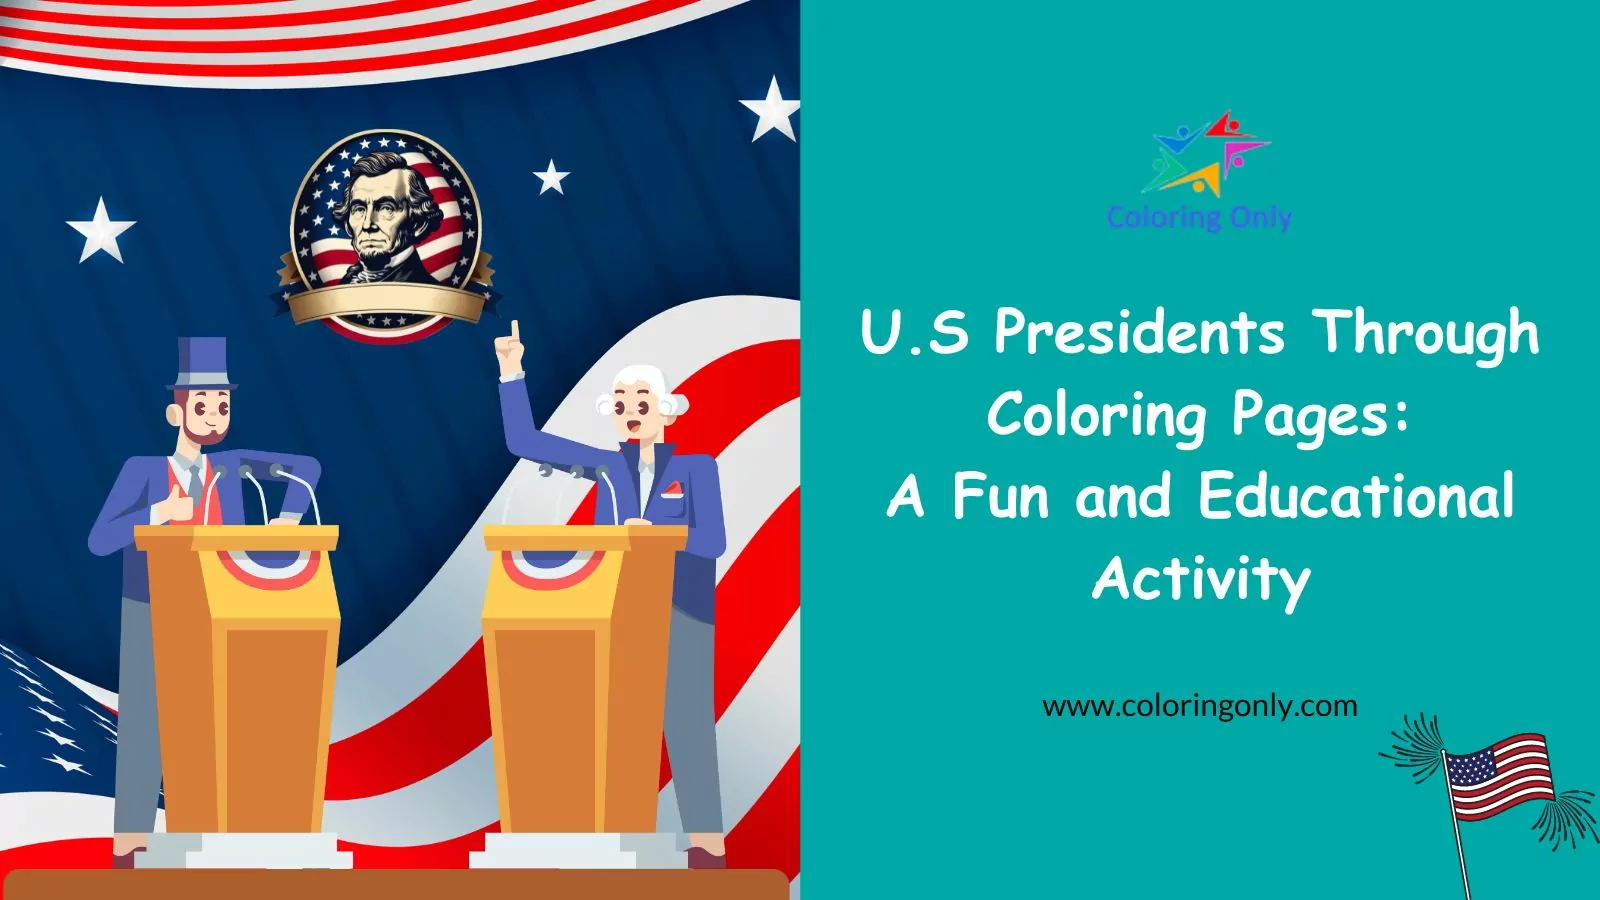 U.S Presidents Through Coloring Pages: A Fun and Educational Activity